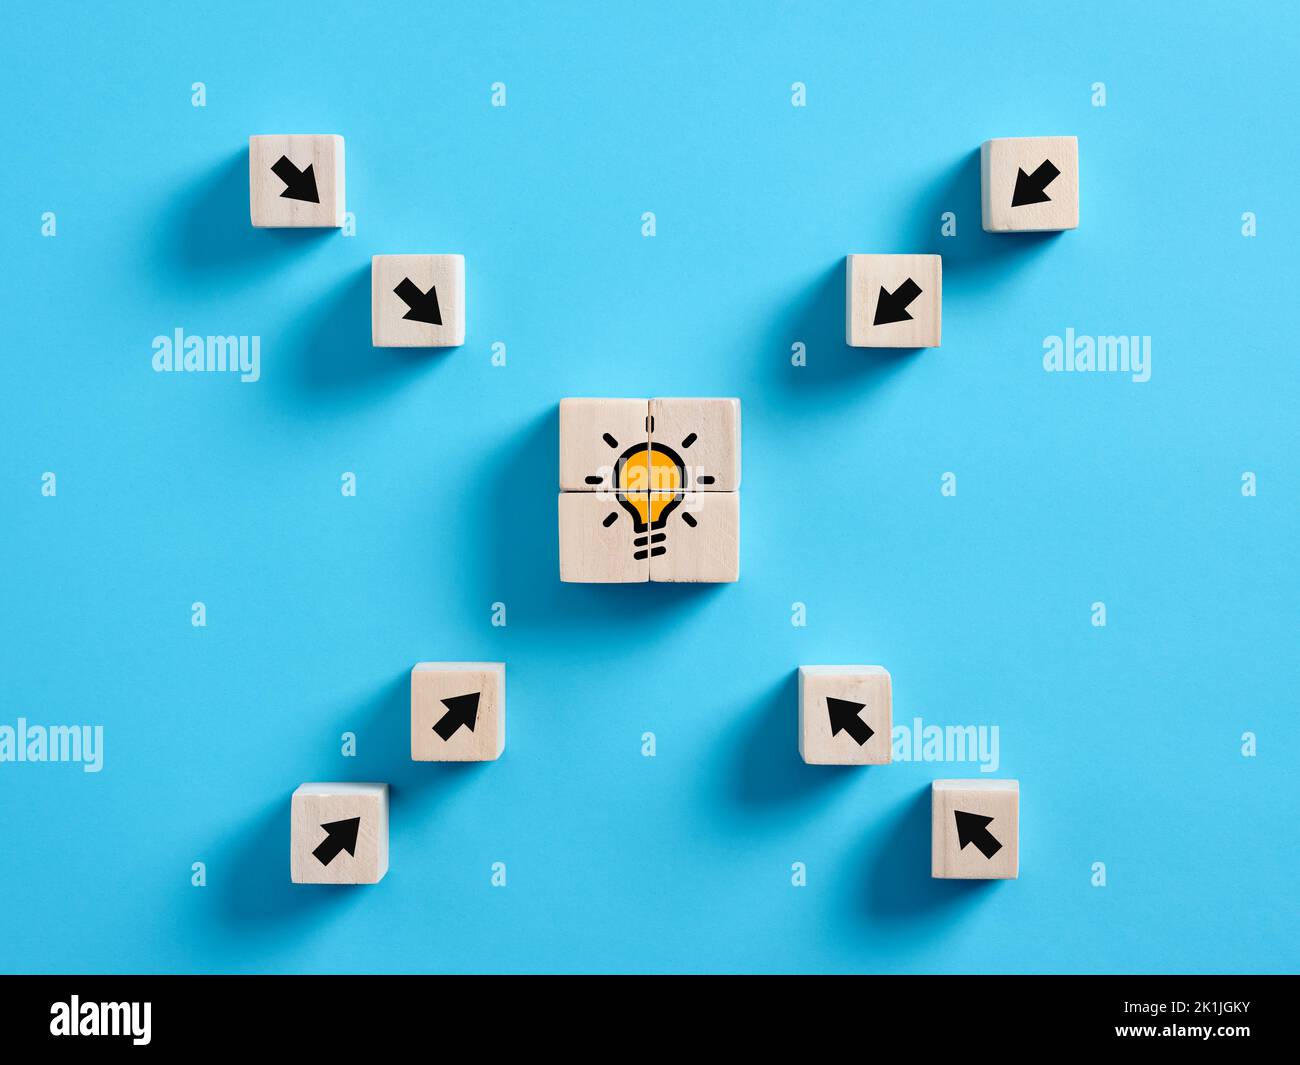 Arrows pointing towards the idea light bulb icon on wooden cube. To find the right idea, to achieve creativity in business or education concept. Stock Photo